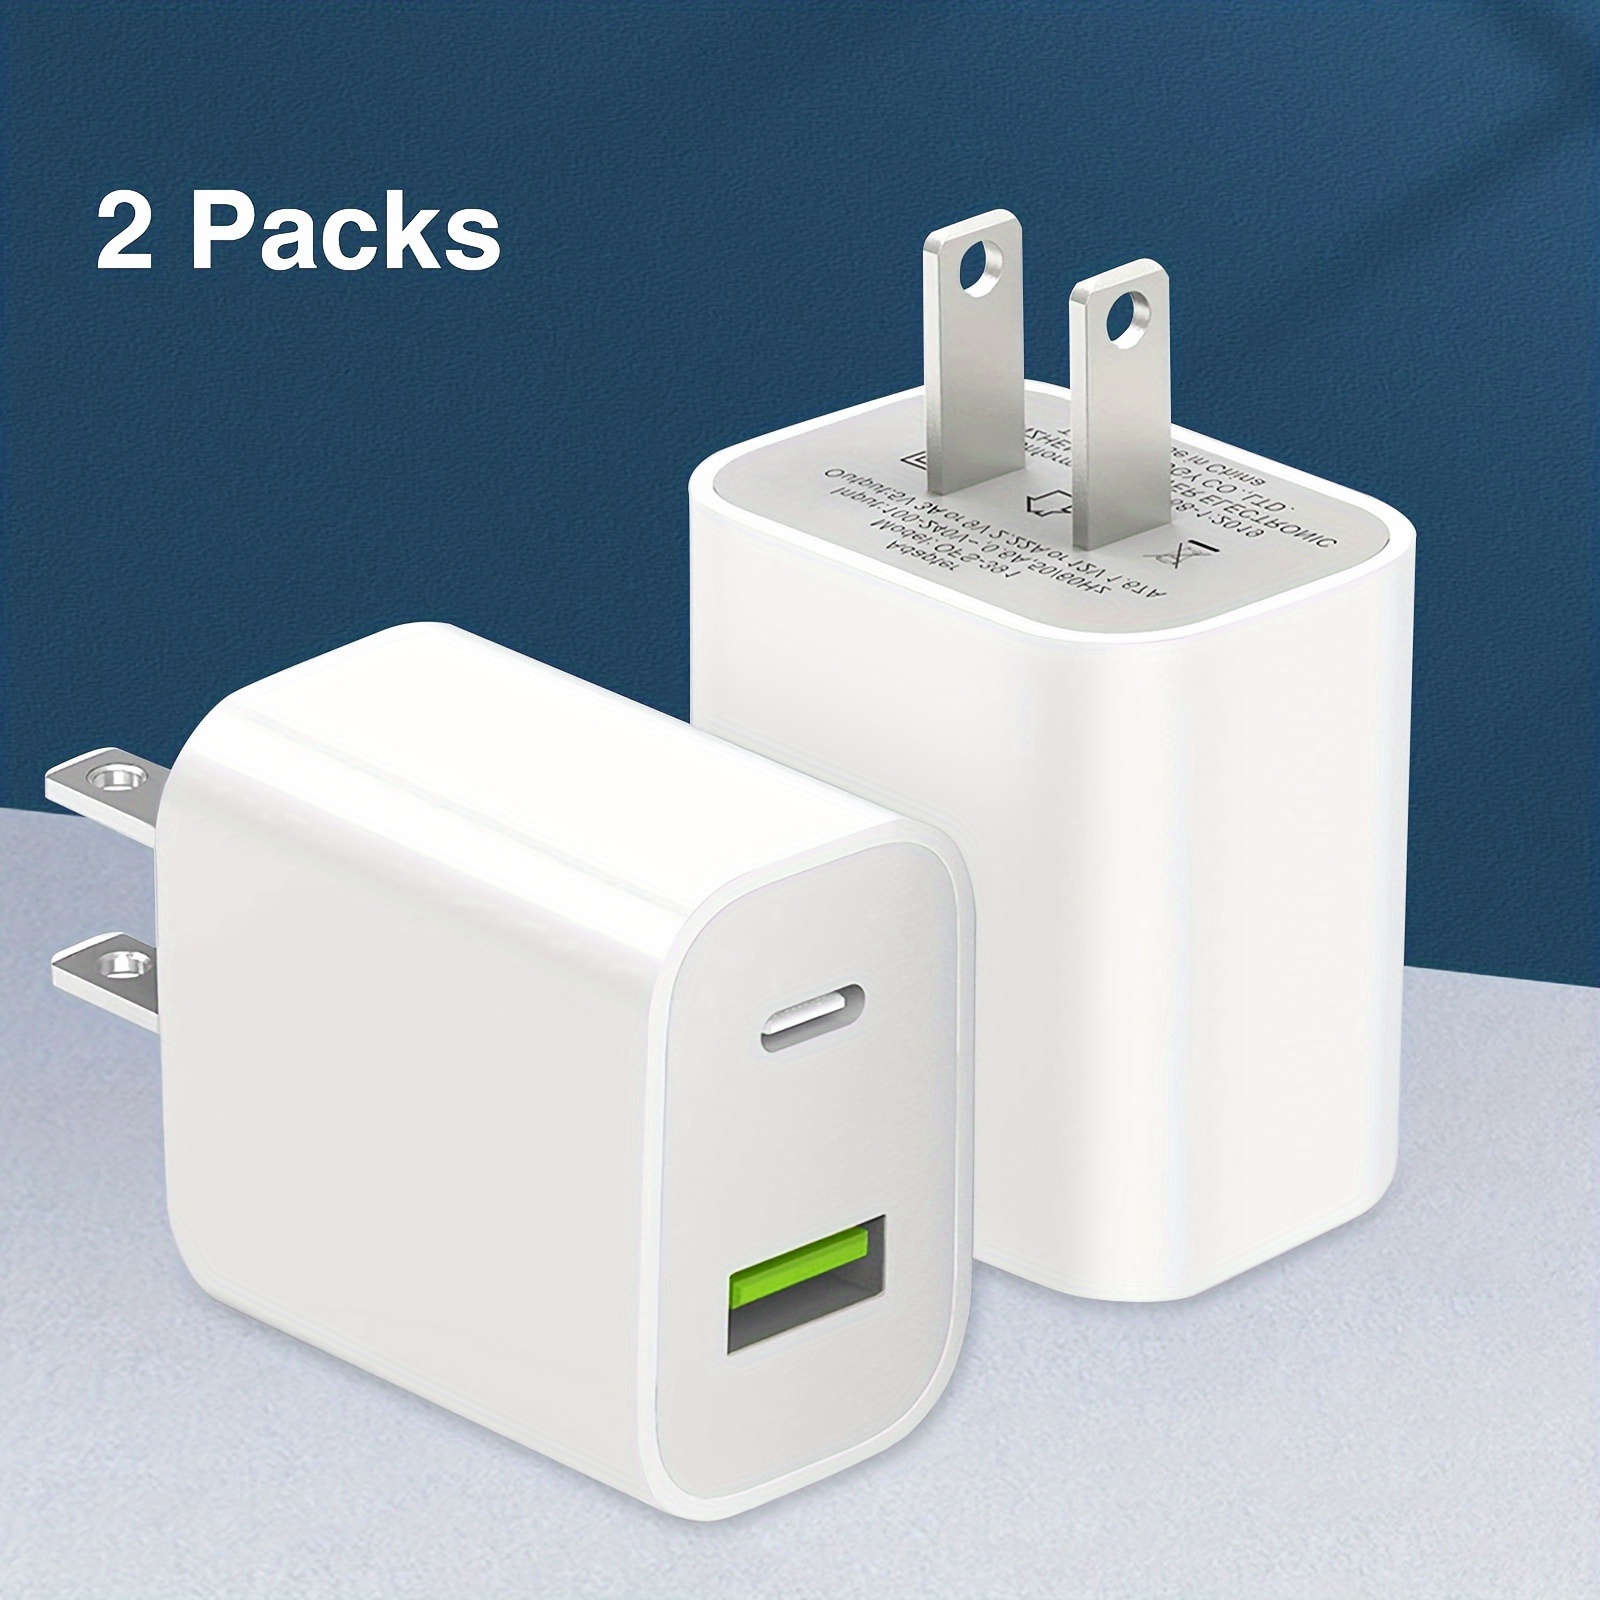 

2pcs White Fast Charger For Iphone 20w Power Adapter Wall Usb Type C Port Fast Plug Fast Charging With Data Cable Suitable For Iphone Tablet Mobile Phone And Other Pd20w Fast Charging Head